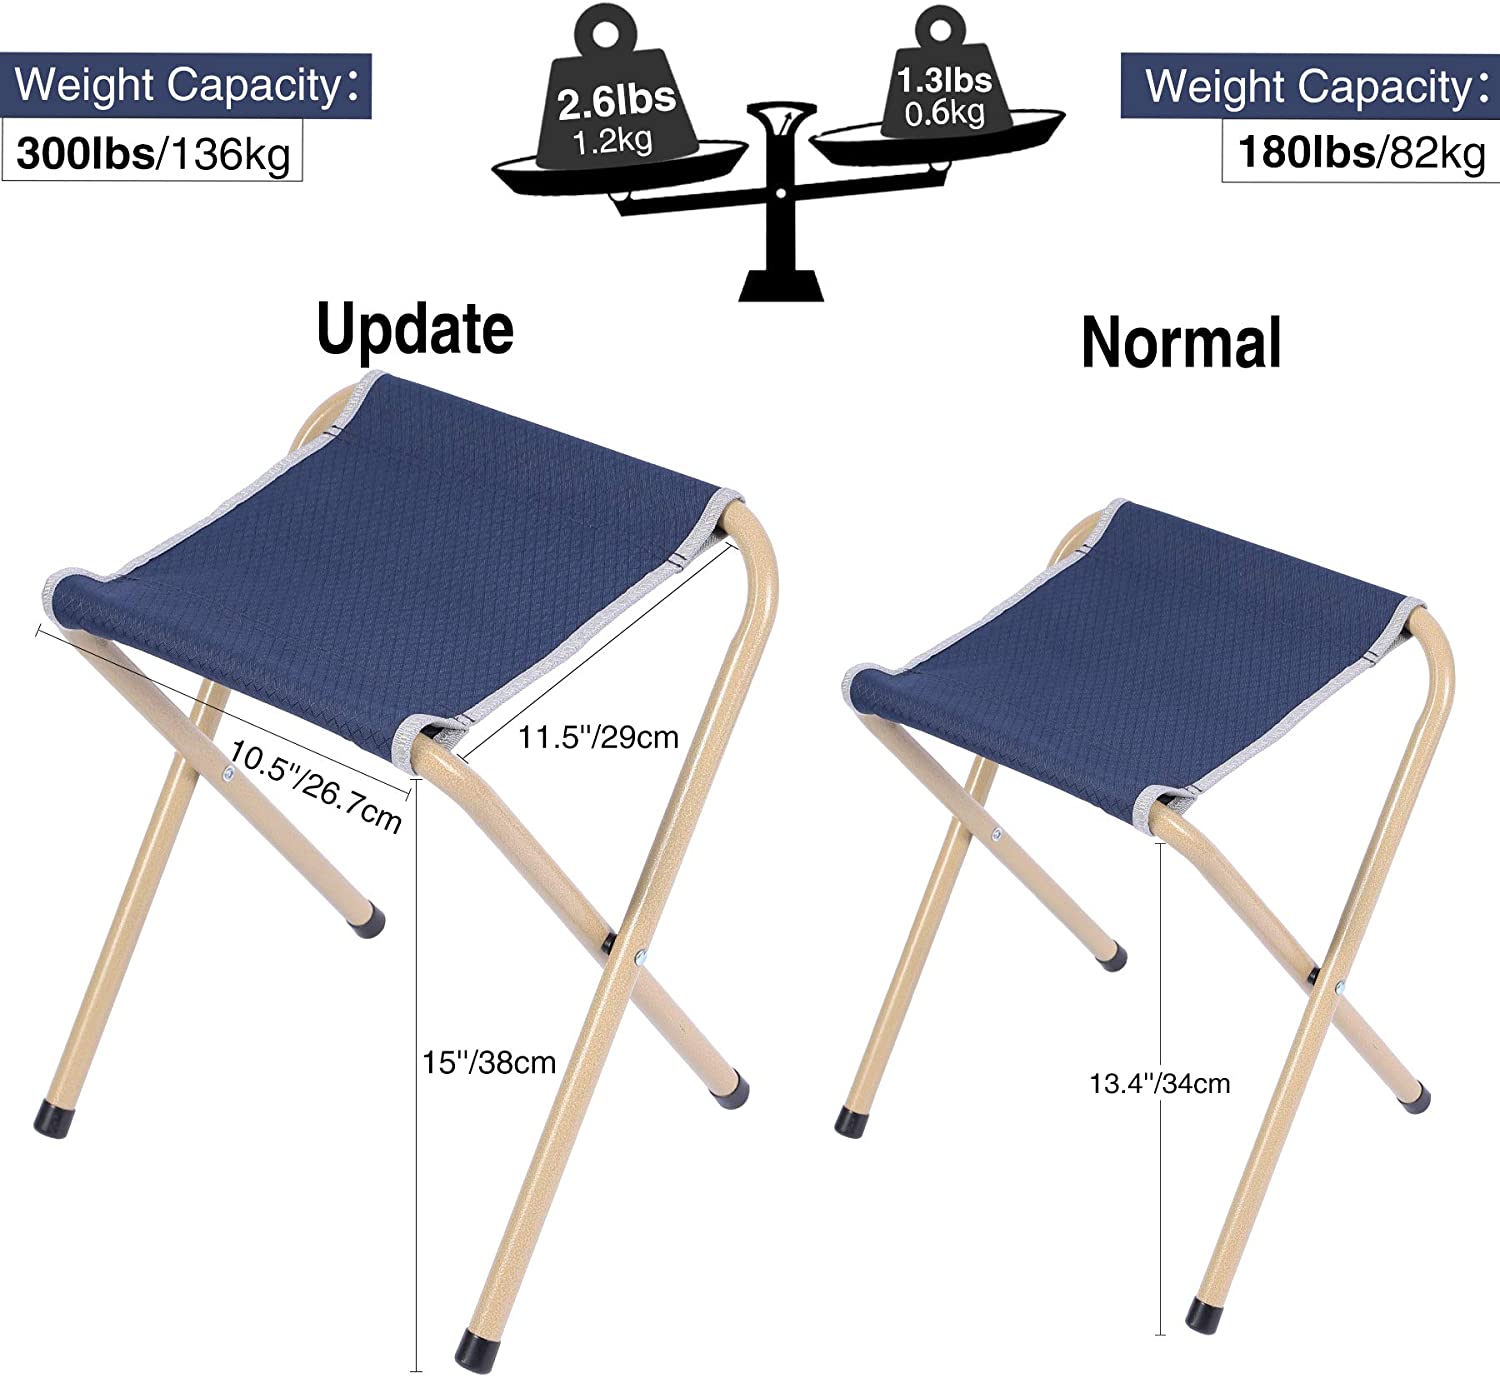 REDCAMP 2-Pack Folding Camp Stools for Adults, 15-inch Tall Sturdy Heavy Duty Portable Camping Stools for Fishing Sitting, Hold 300lbs Heavy People and Kids, Gray Blue - image 4 of 7